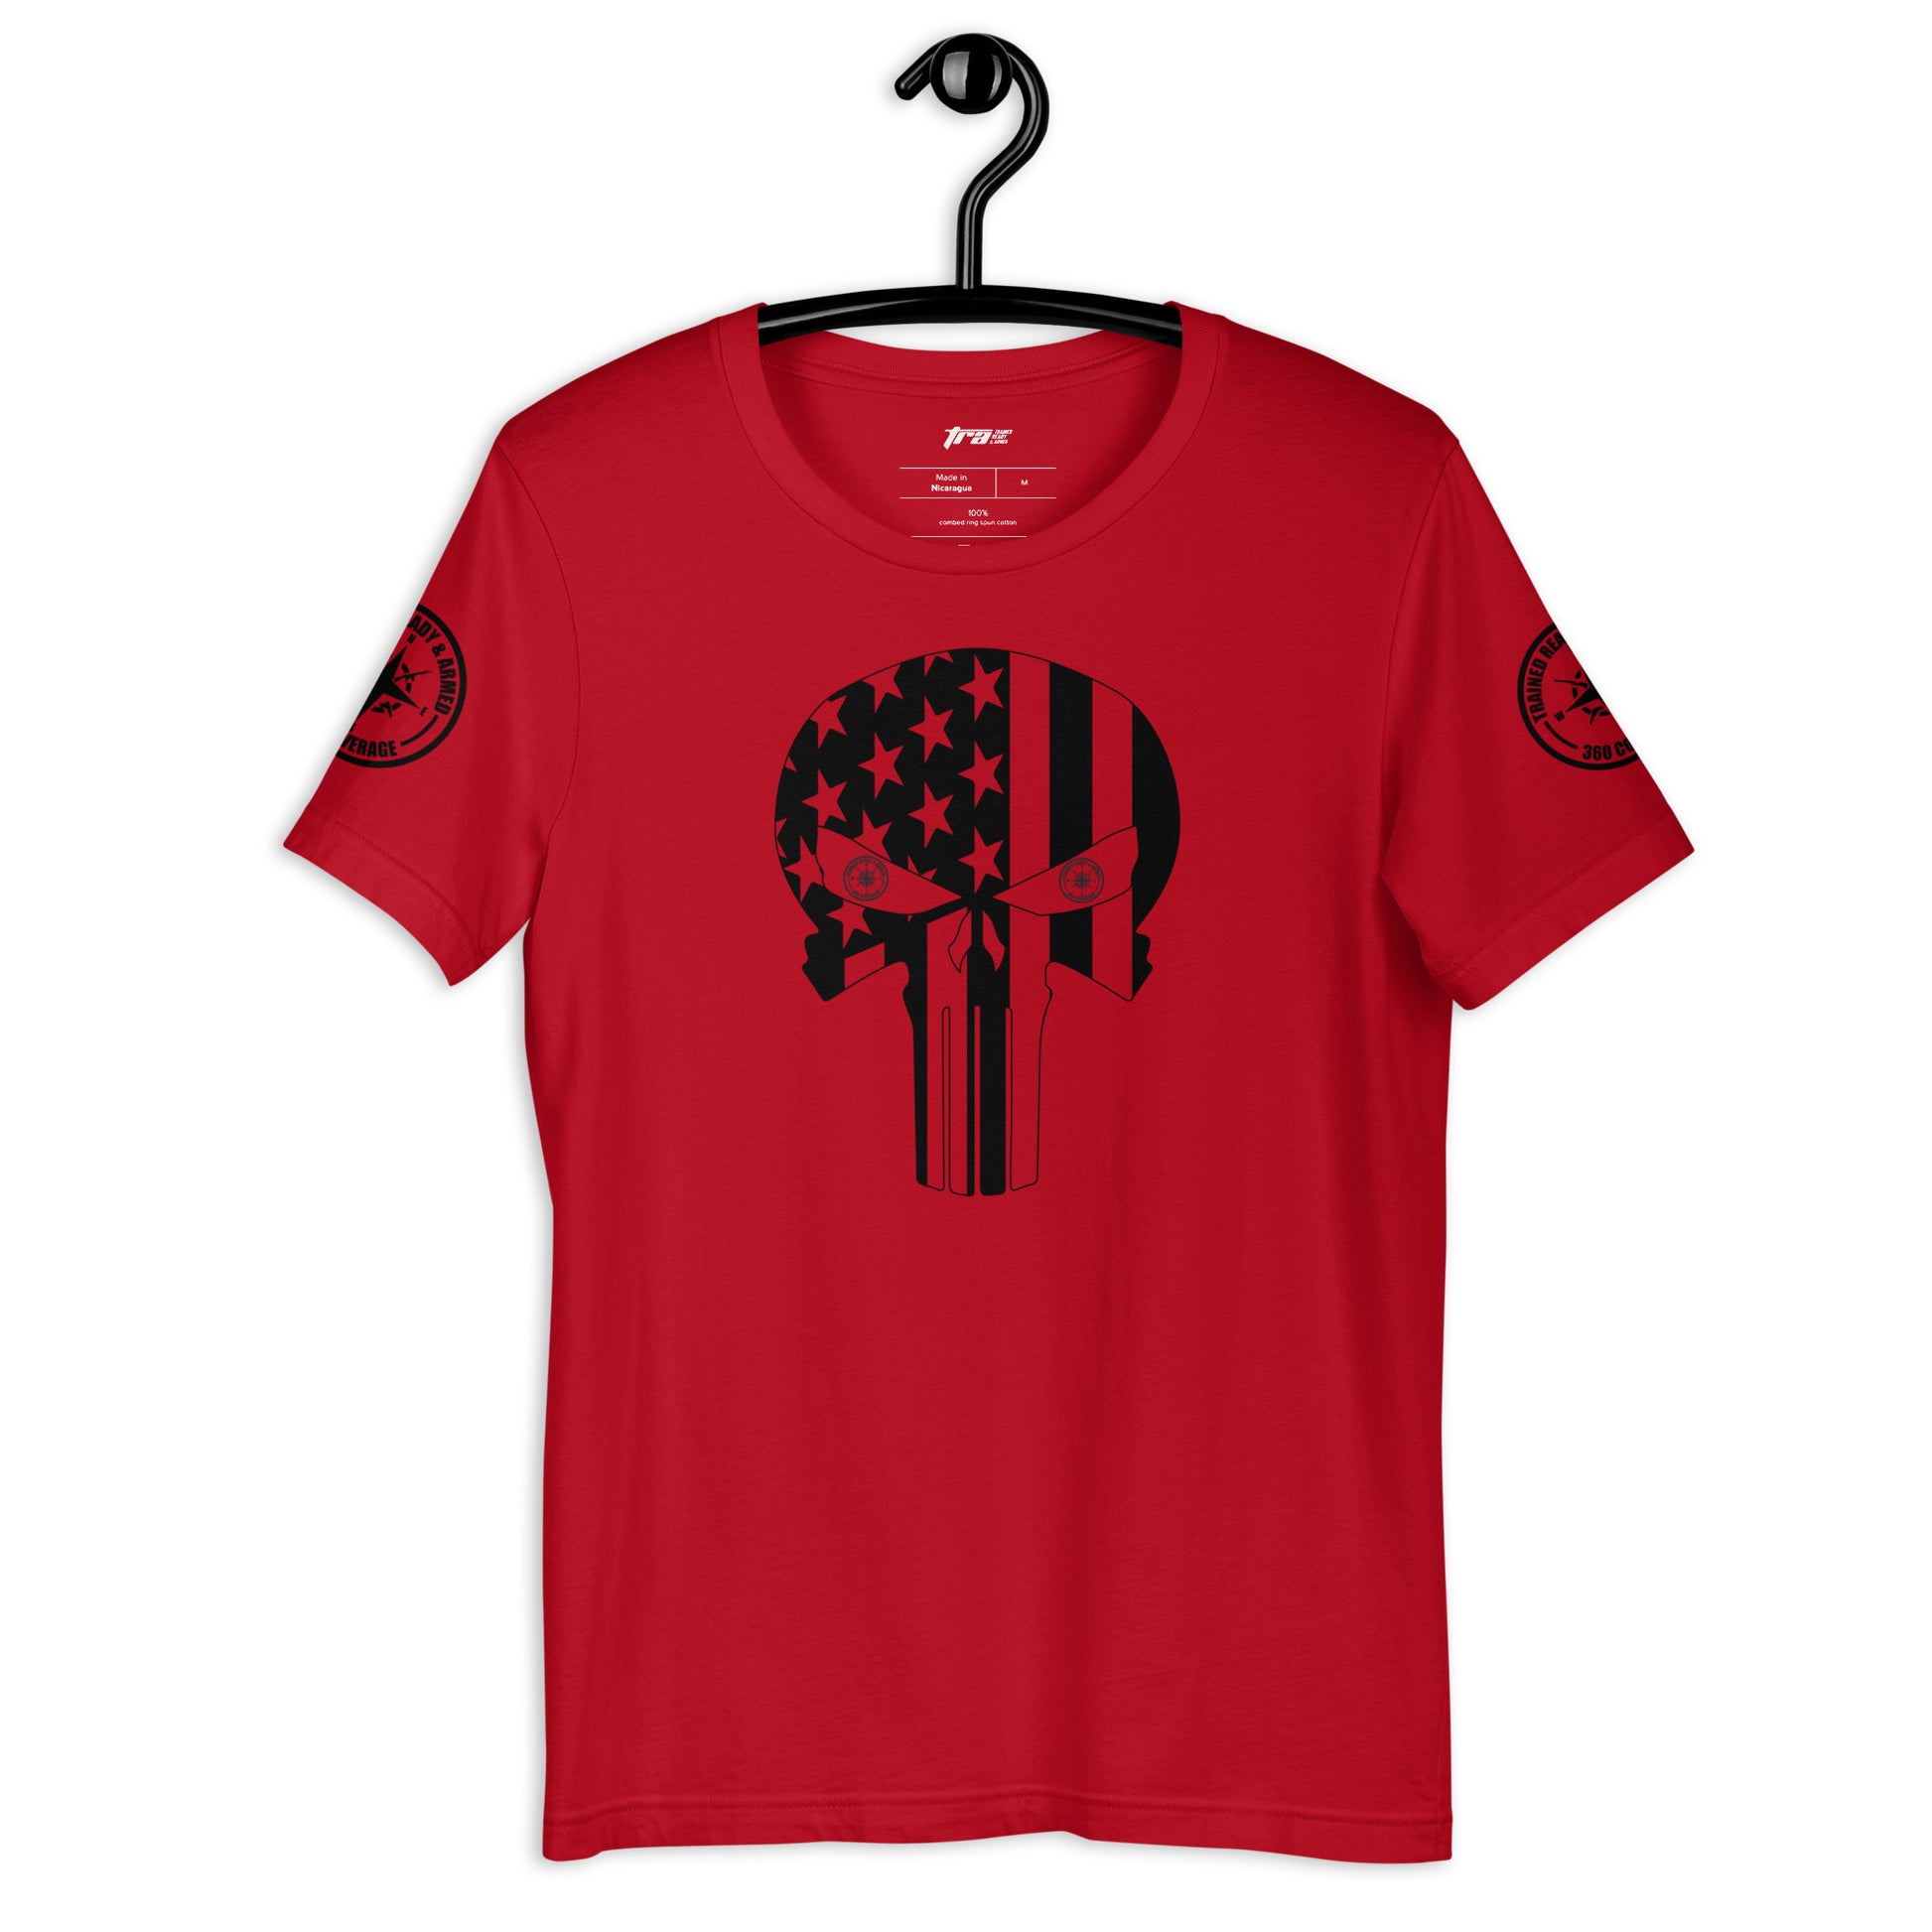 Trained Ready & Armed BK- Punisher Premium men's t-shirt - Trained Ready Armed Apparel